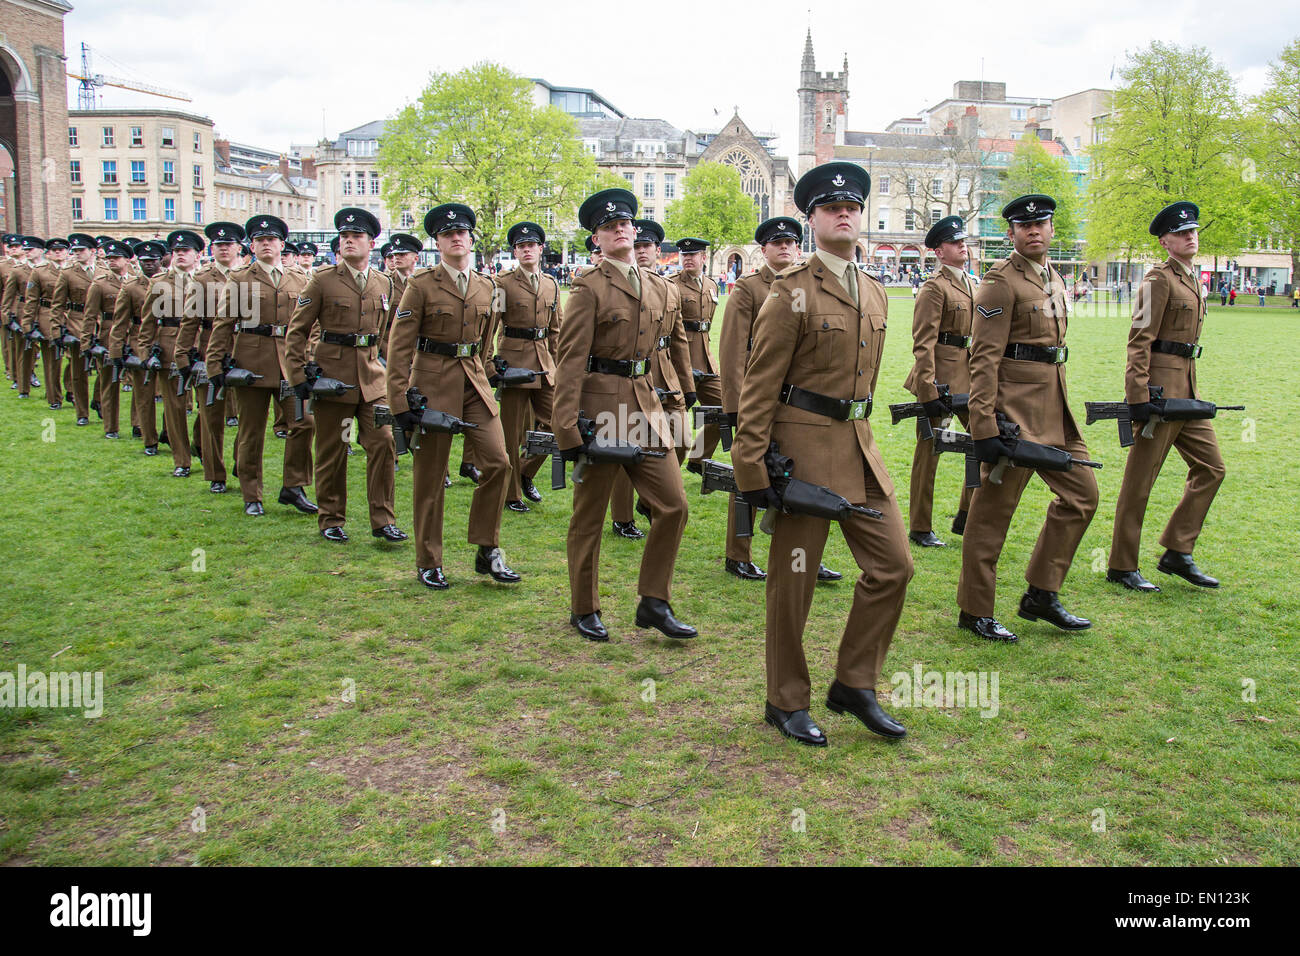 Soldiers from British Army Regiment The Rifles march through the ...